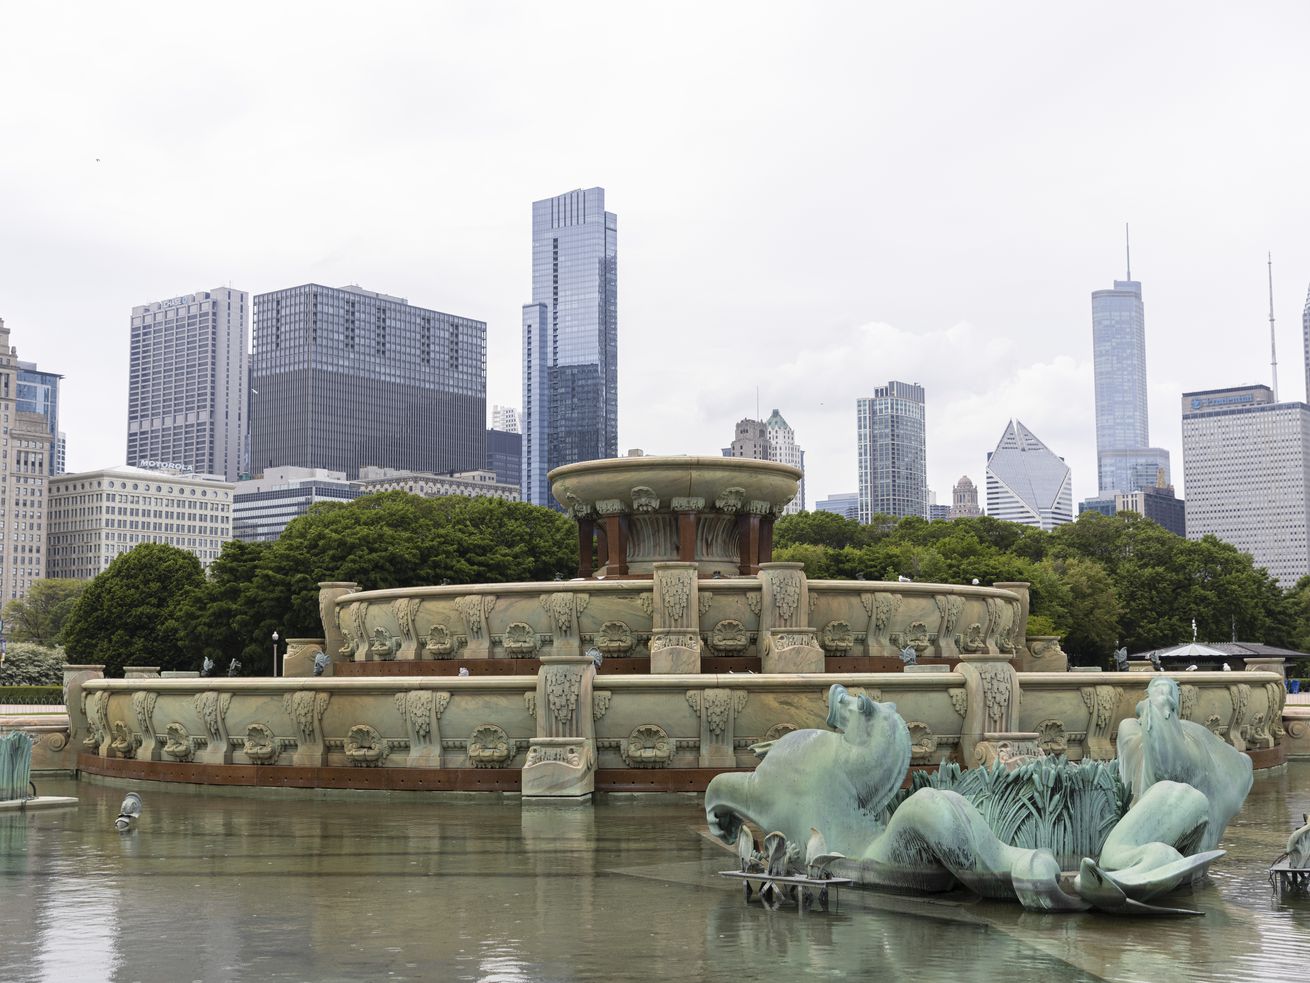 The Buckingham Fountain in Grant Park on Tuesday, May 18, 2021.